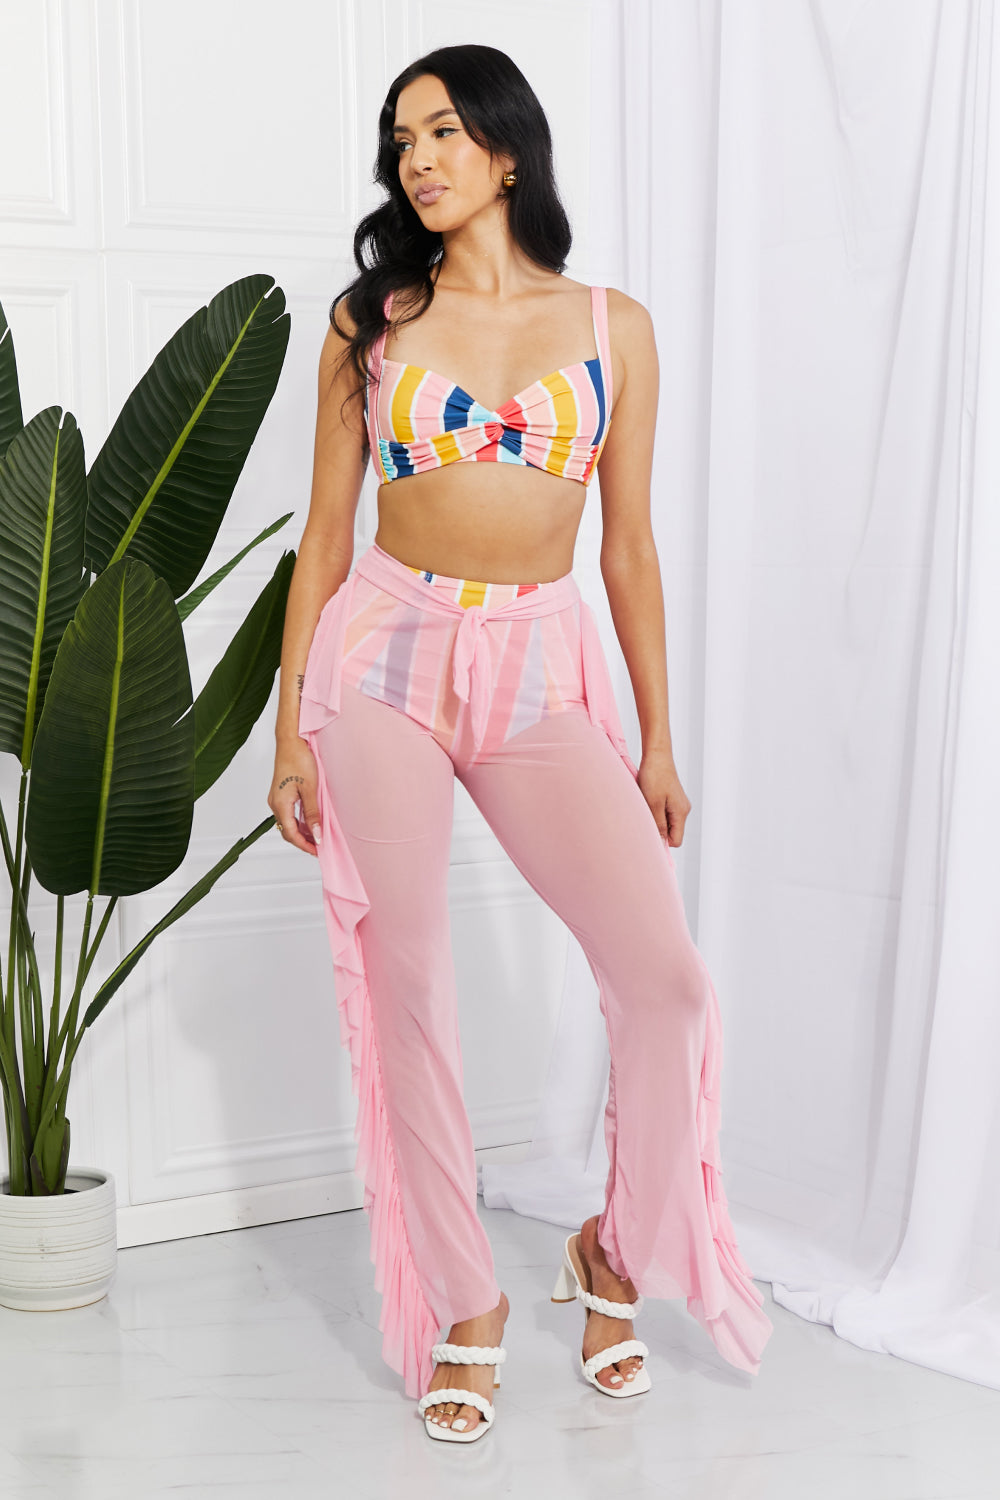 Marina West Swim Take Me To The Beach Mesh Ruffle Cover-Up Pants Print on any thing USA/STOD clothes